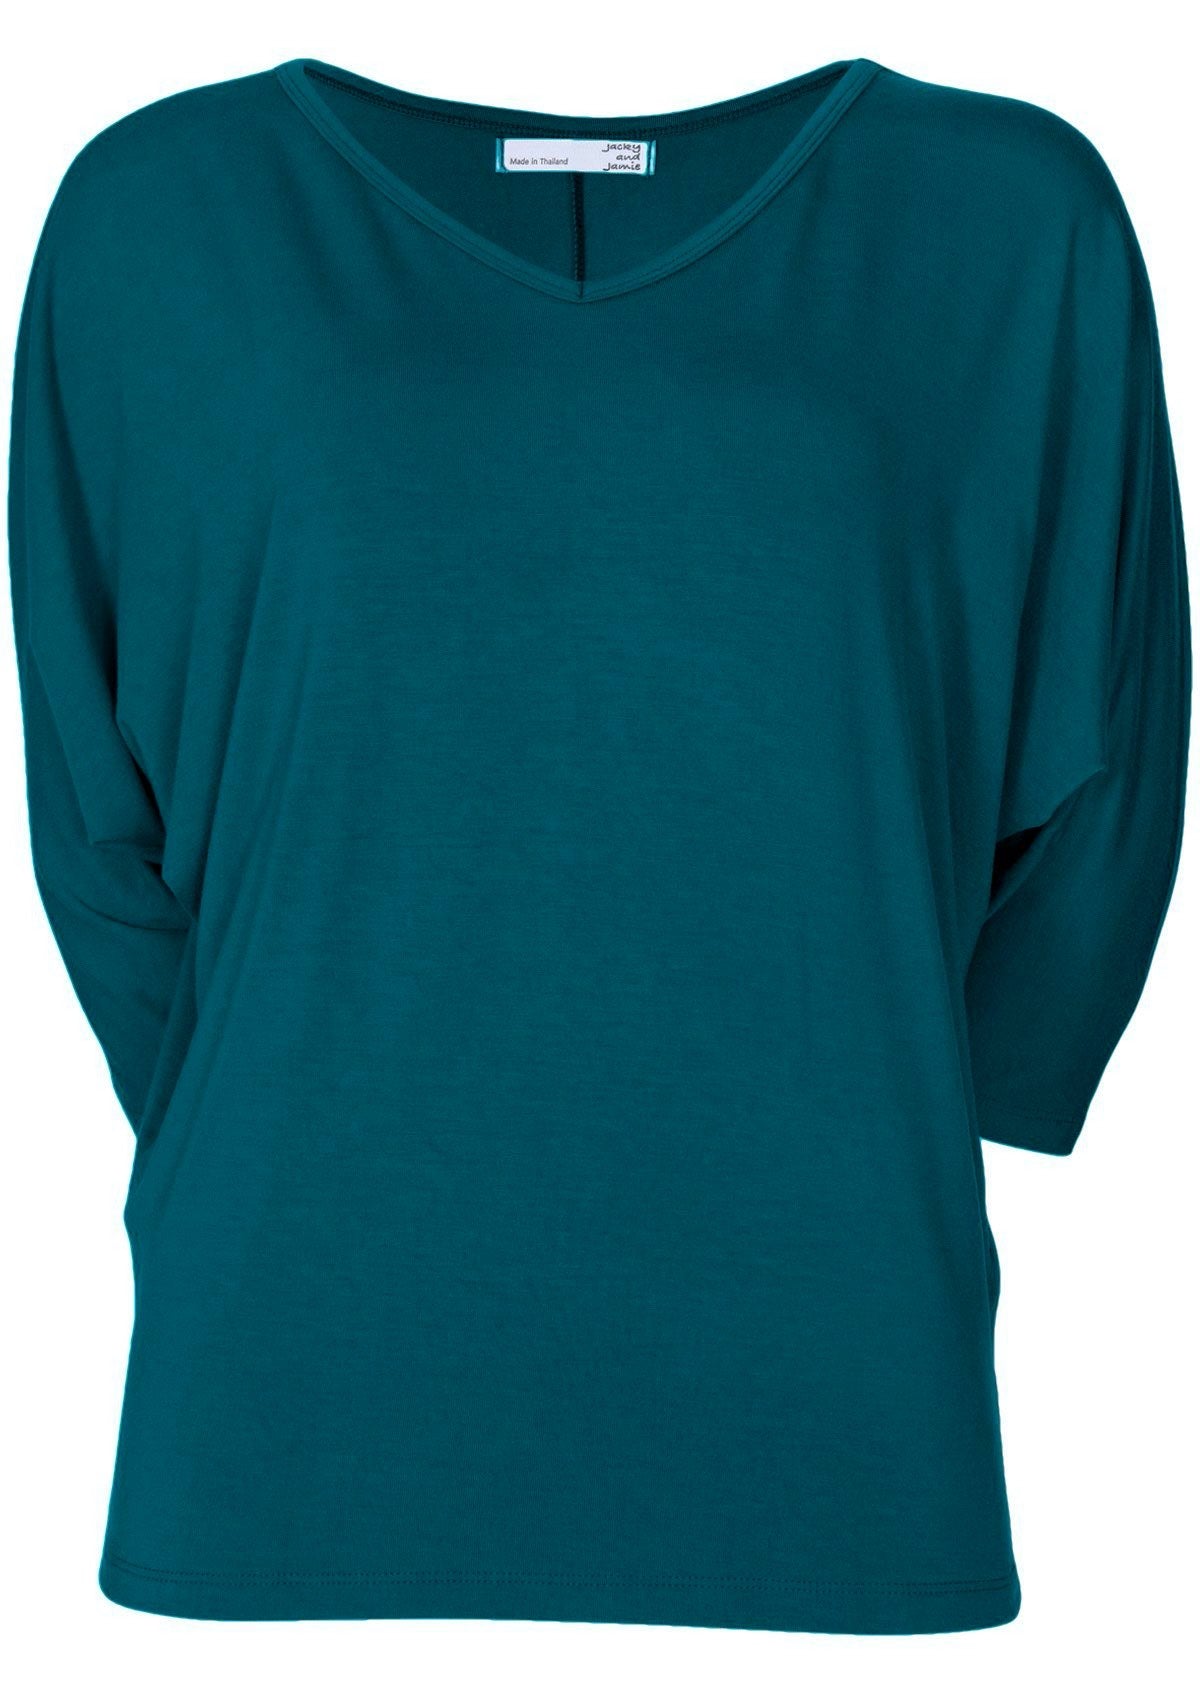 Front view of women's 3/4 sleeve rayon batwing v-neck teal top.